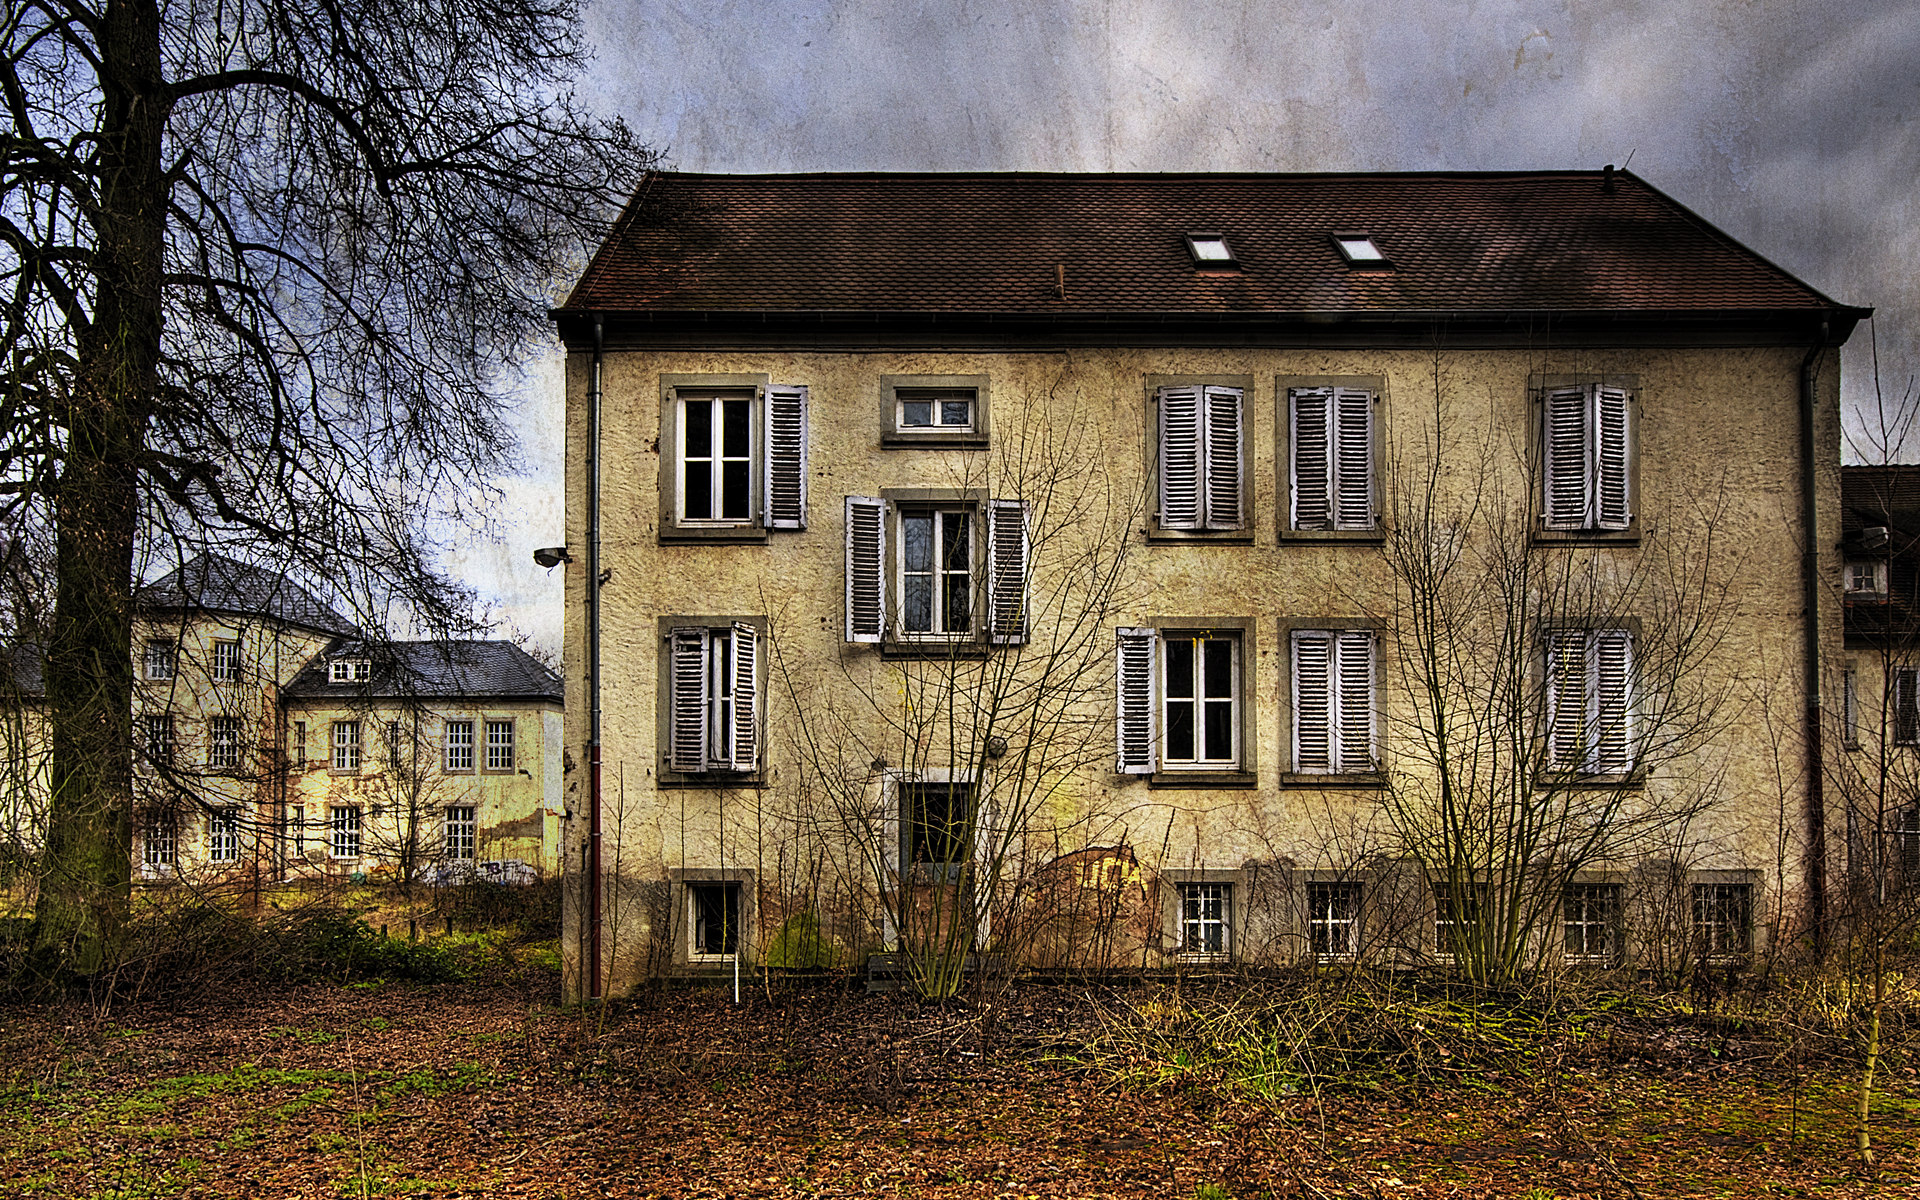 Urban Ruins And Abandoned Buildings Is A Great Wallpaper For Your